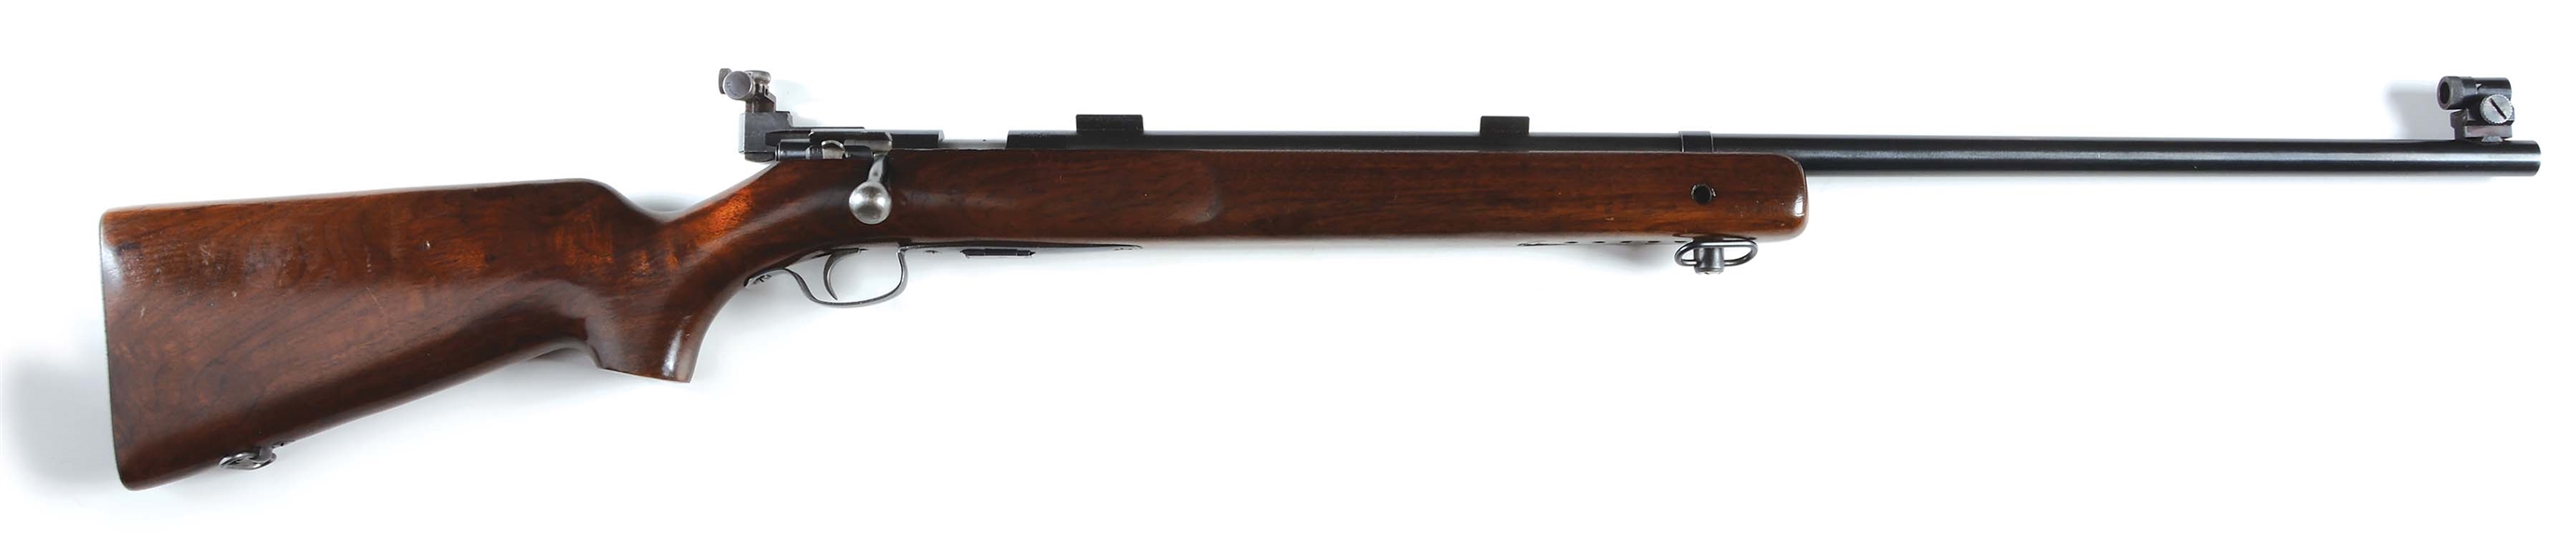 (C) WINCHESTER MODEL 75 BOLT ACTION RIFLE WITH SCOPE.